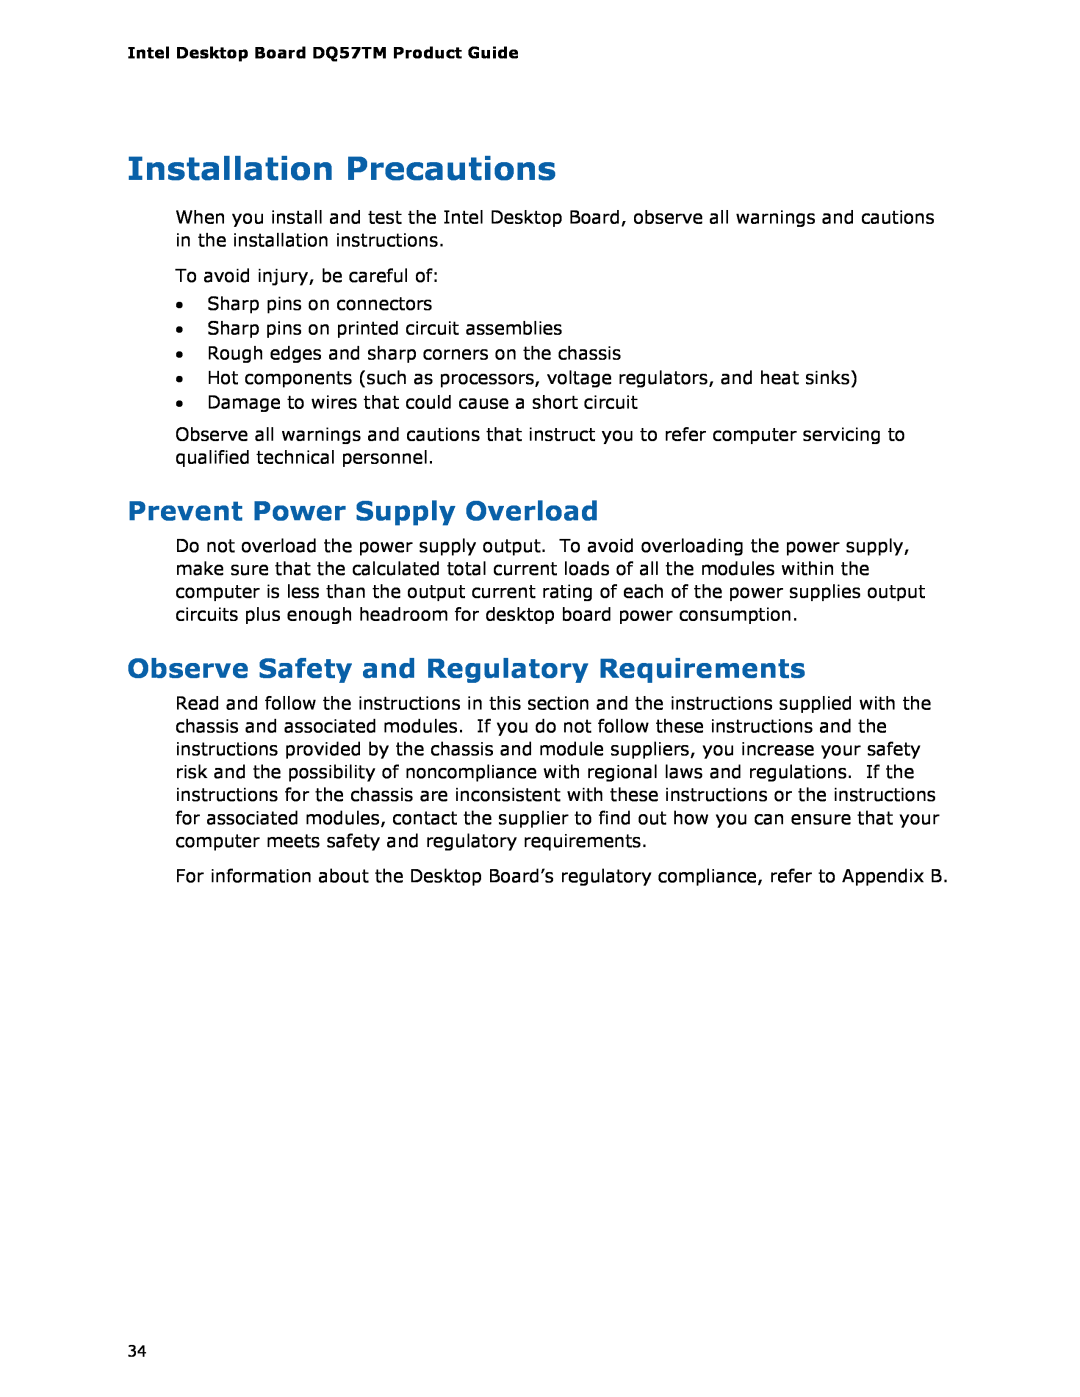 Intel DQ57TM manual Installation Precautions, Prevent Power Supply Overload, Observe Safety and Regulatory Requirements 